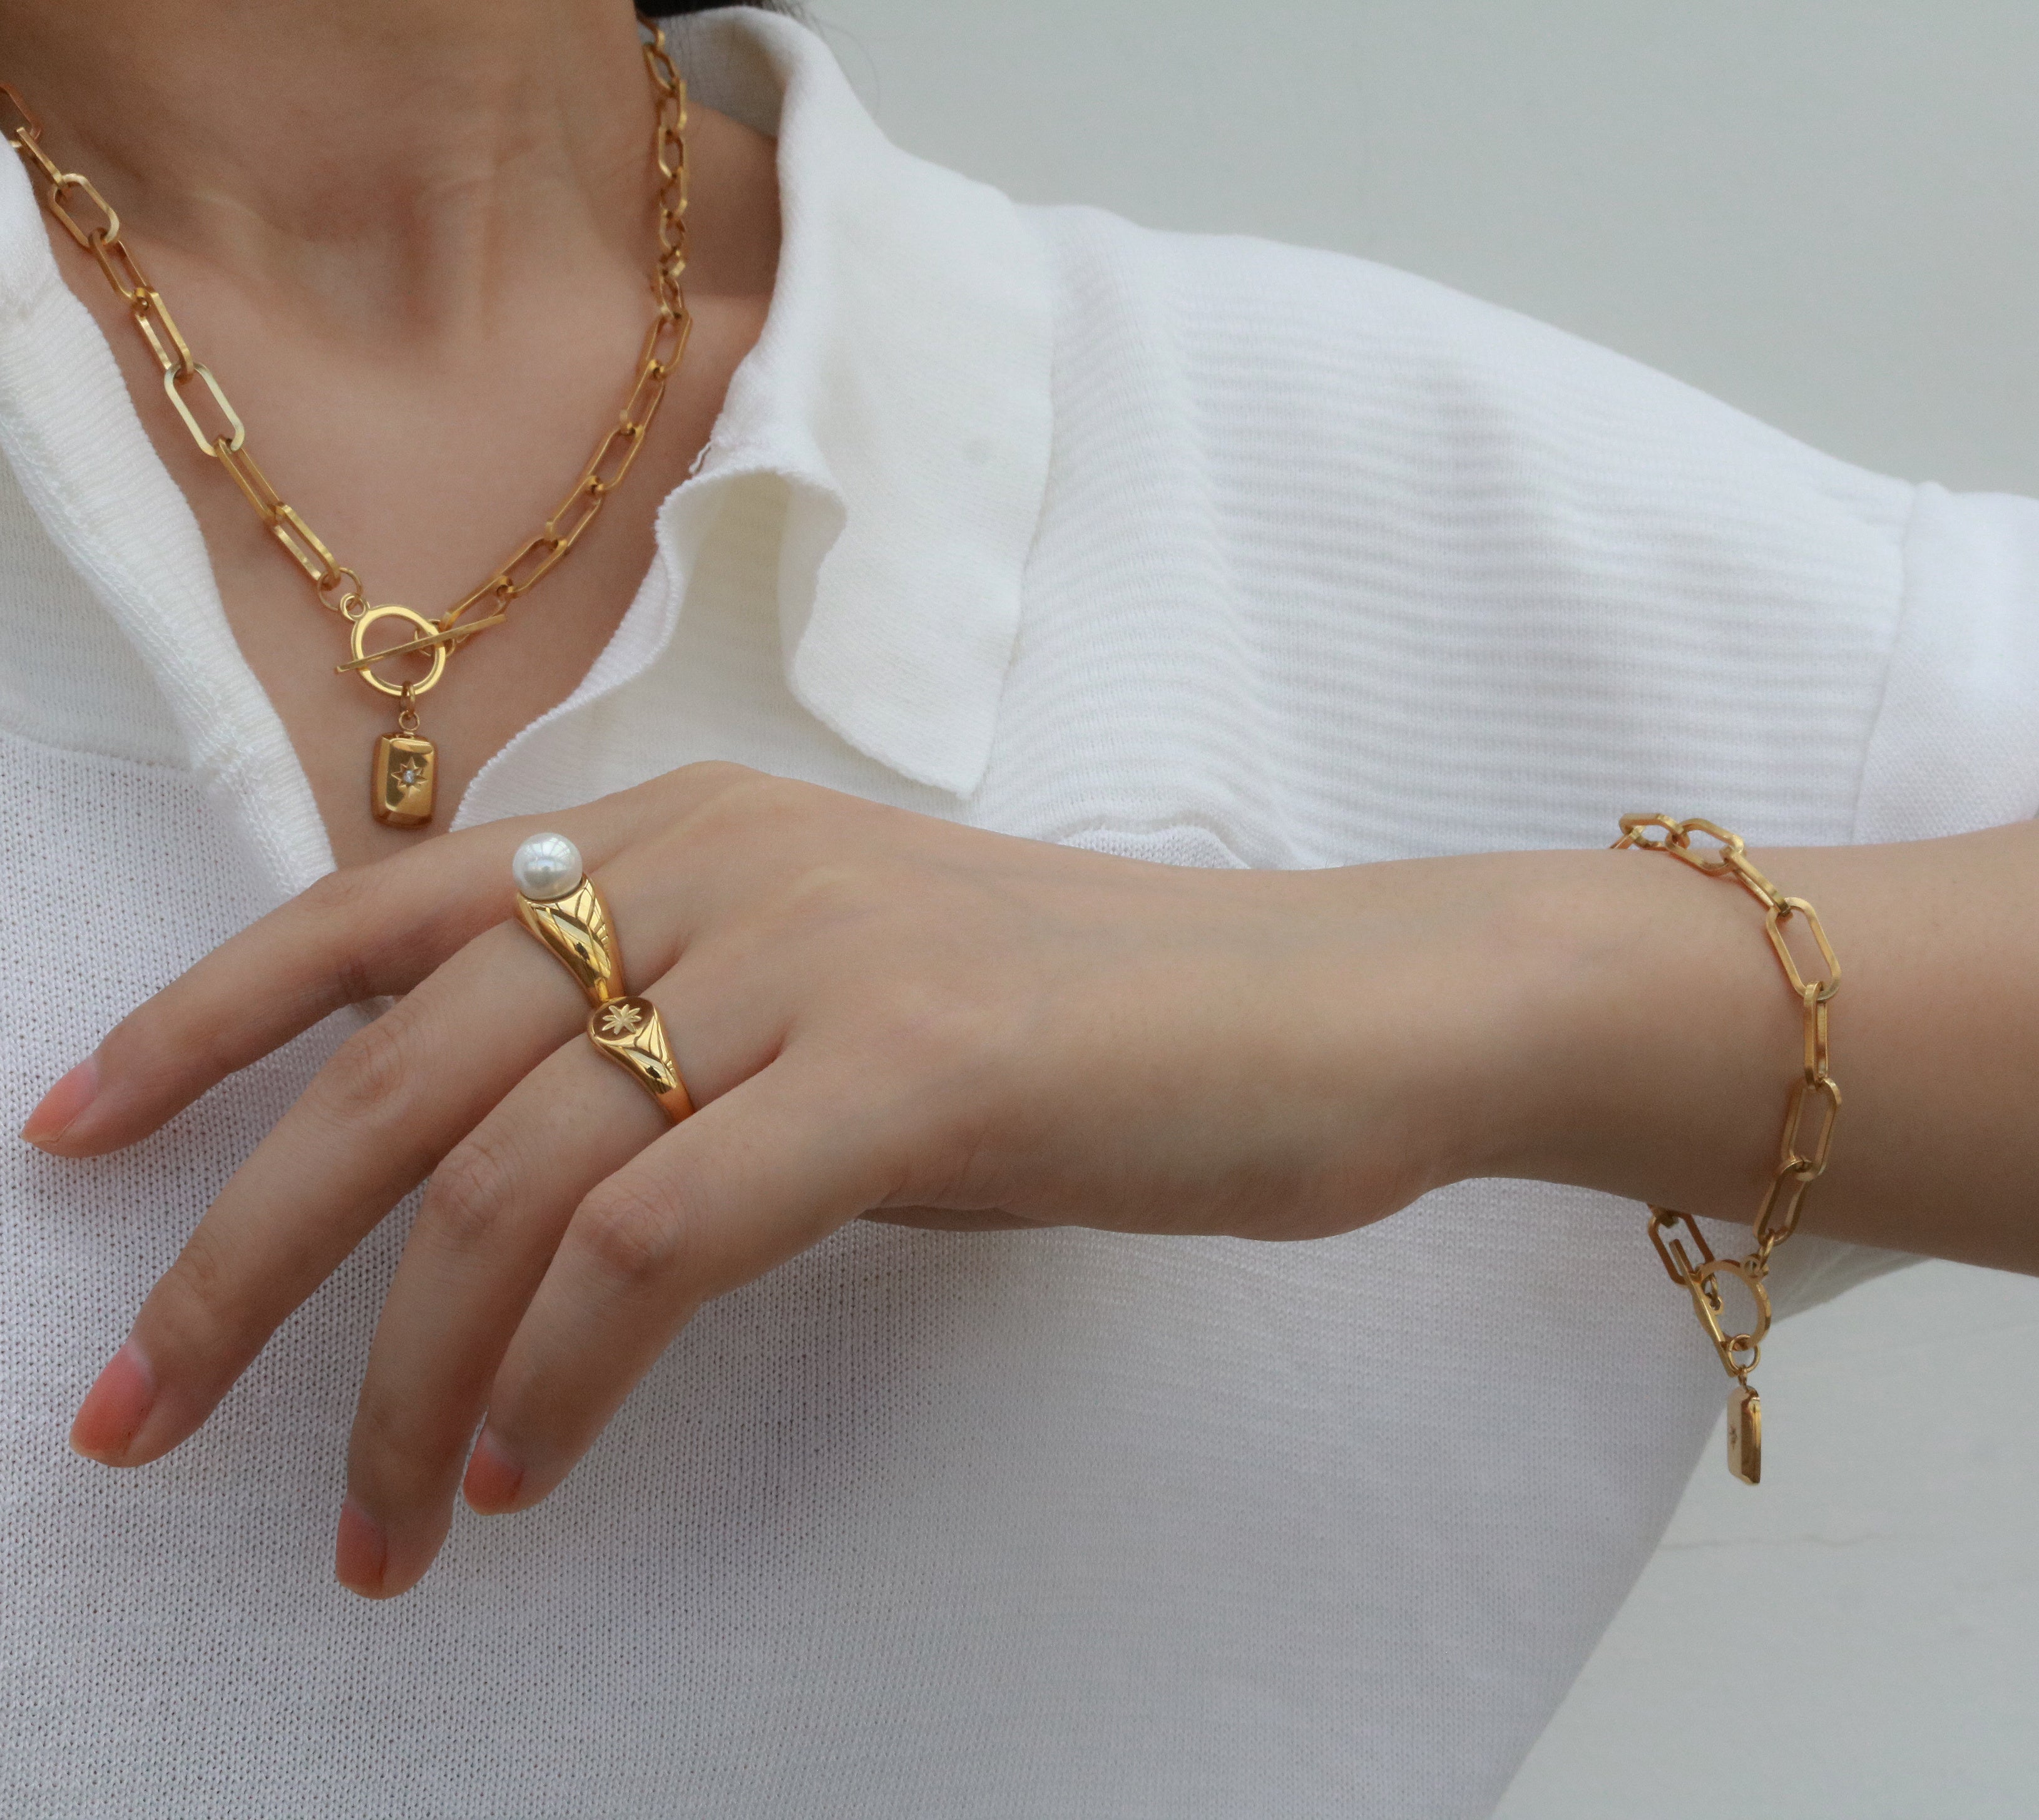 gold bracelet and gold rings